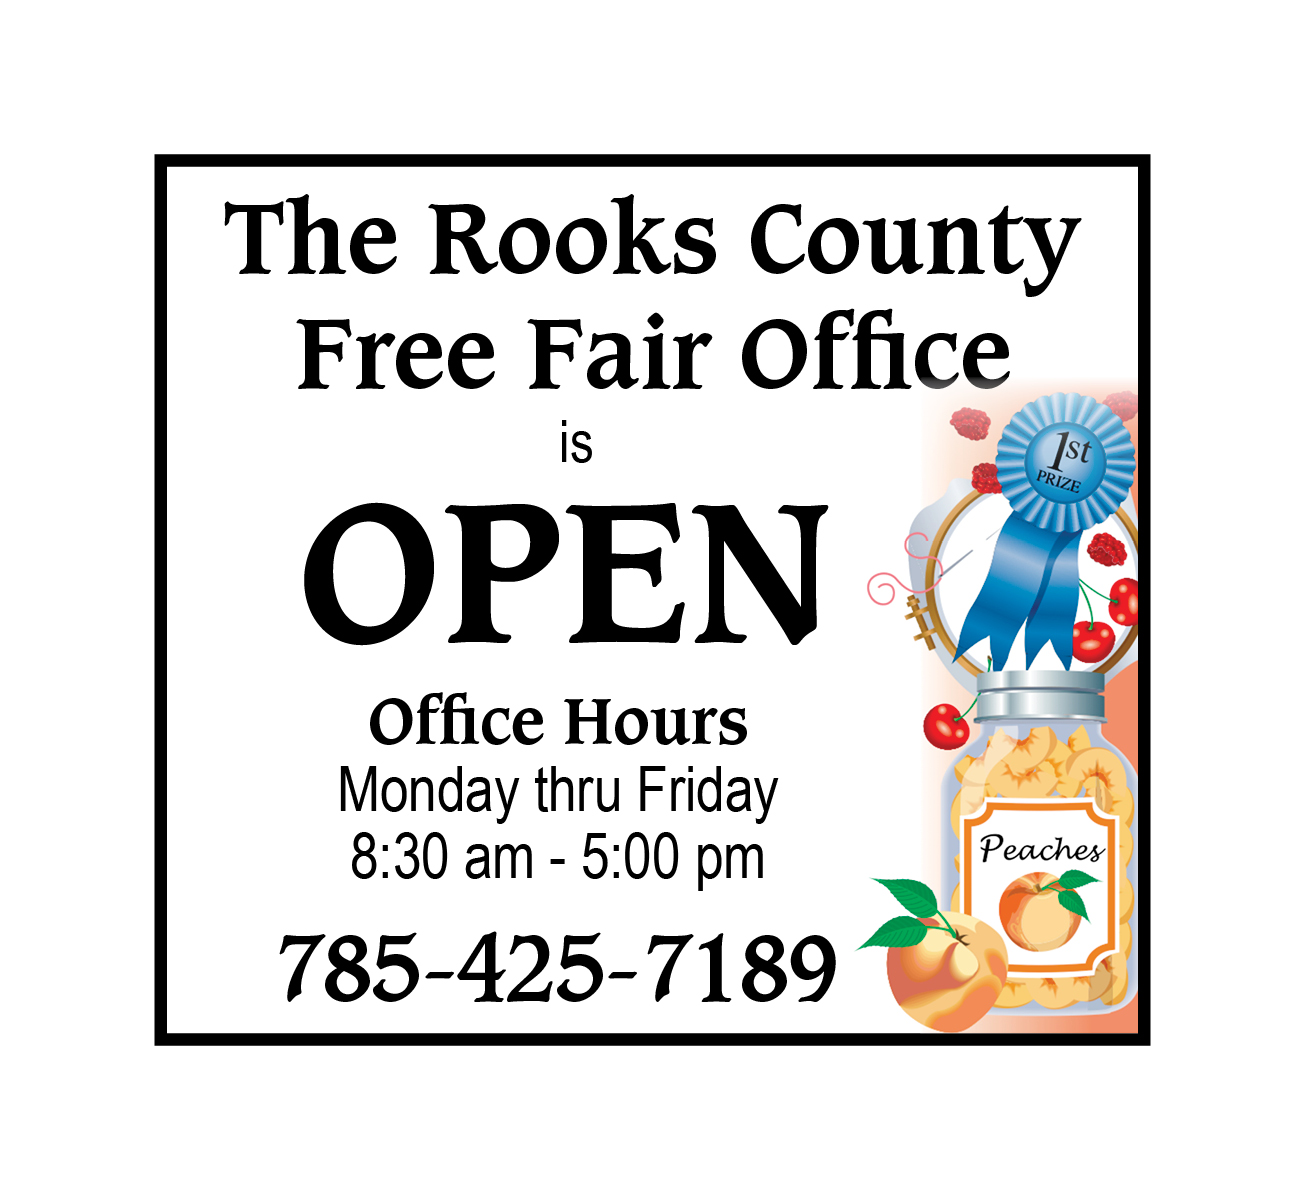 The Rooks County Free Fair Office is open! Stockton Sentinel